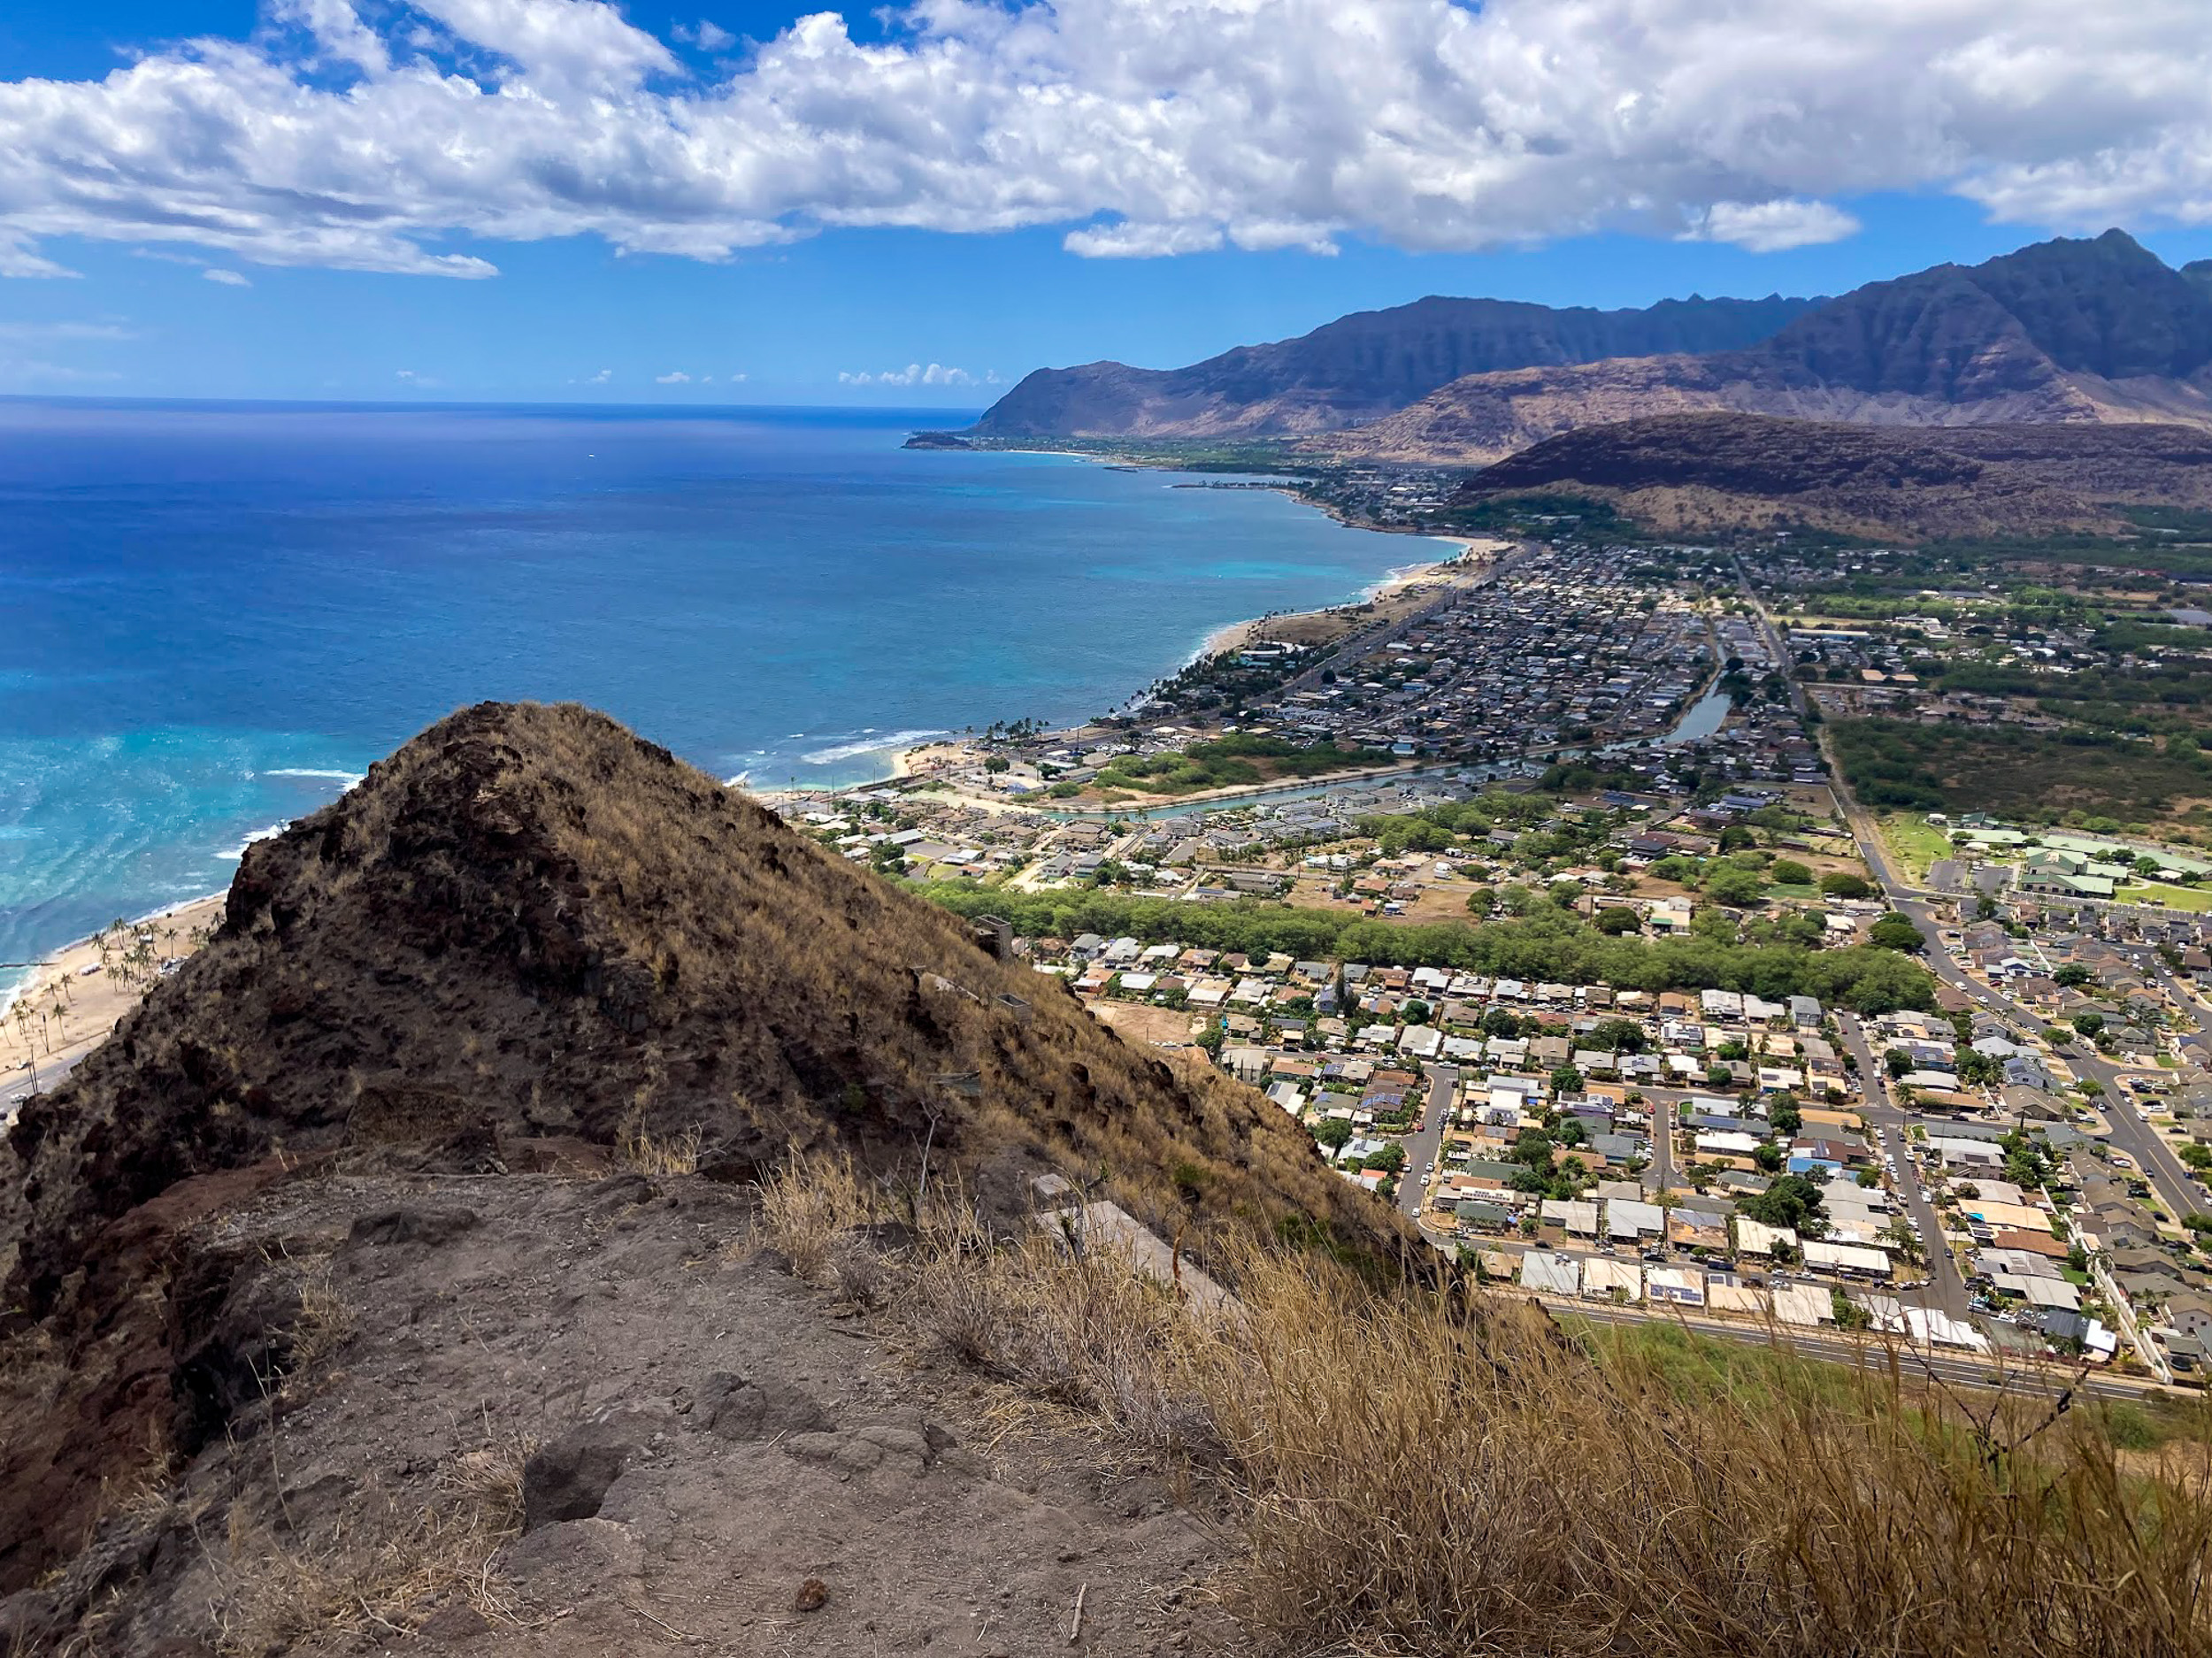 A bird’s eye view of the west side of the island of Oʻahu with beaches, neighborhoods and mountains.